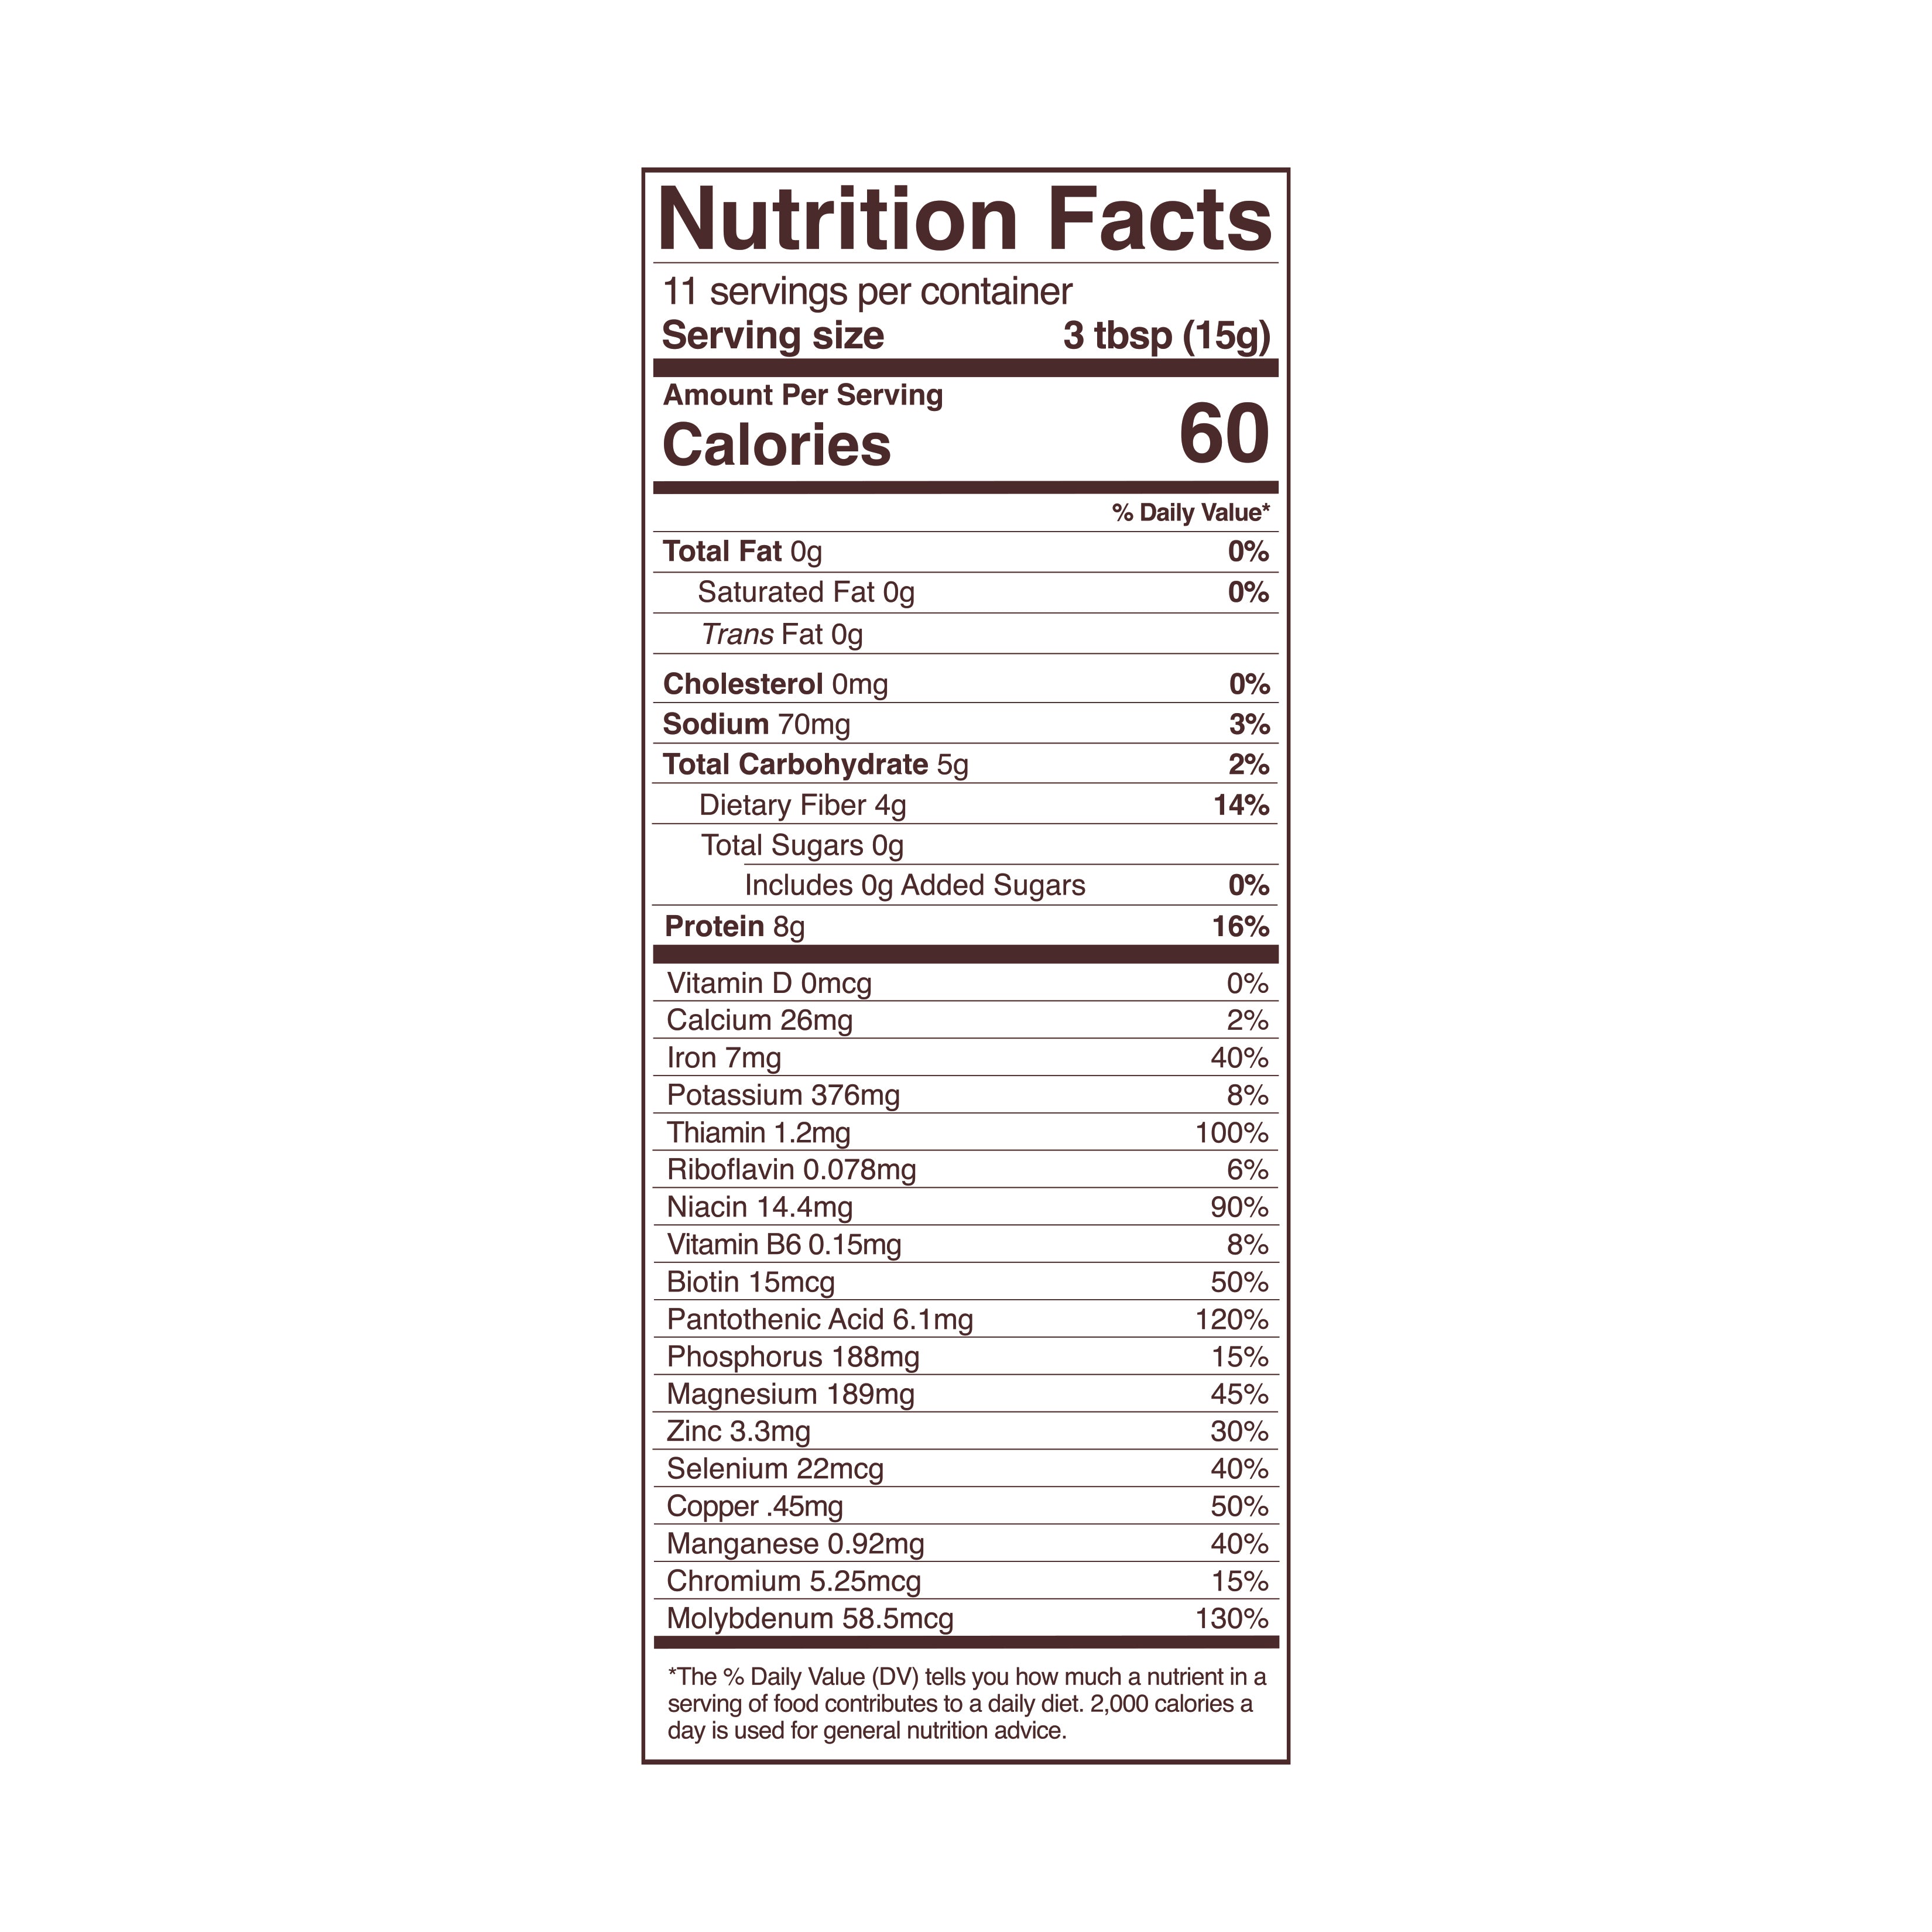 Foods Alive - Nutritional Yeast - 6 oz - Nutrition Facts